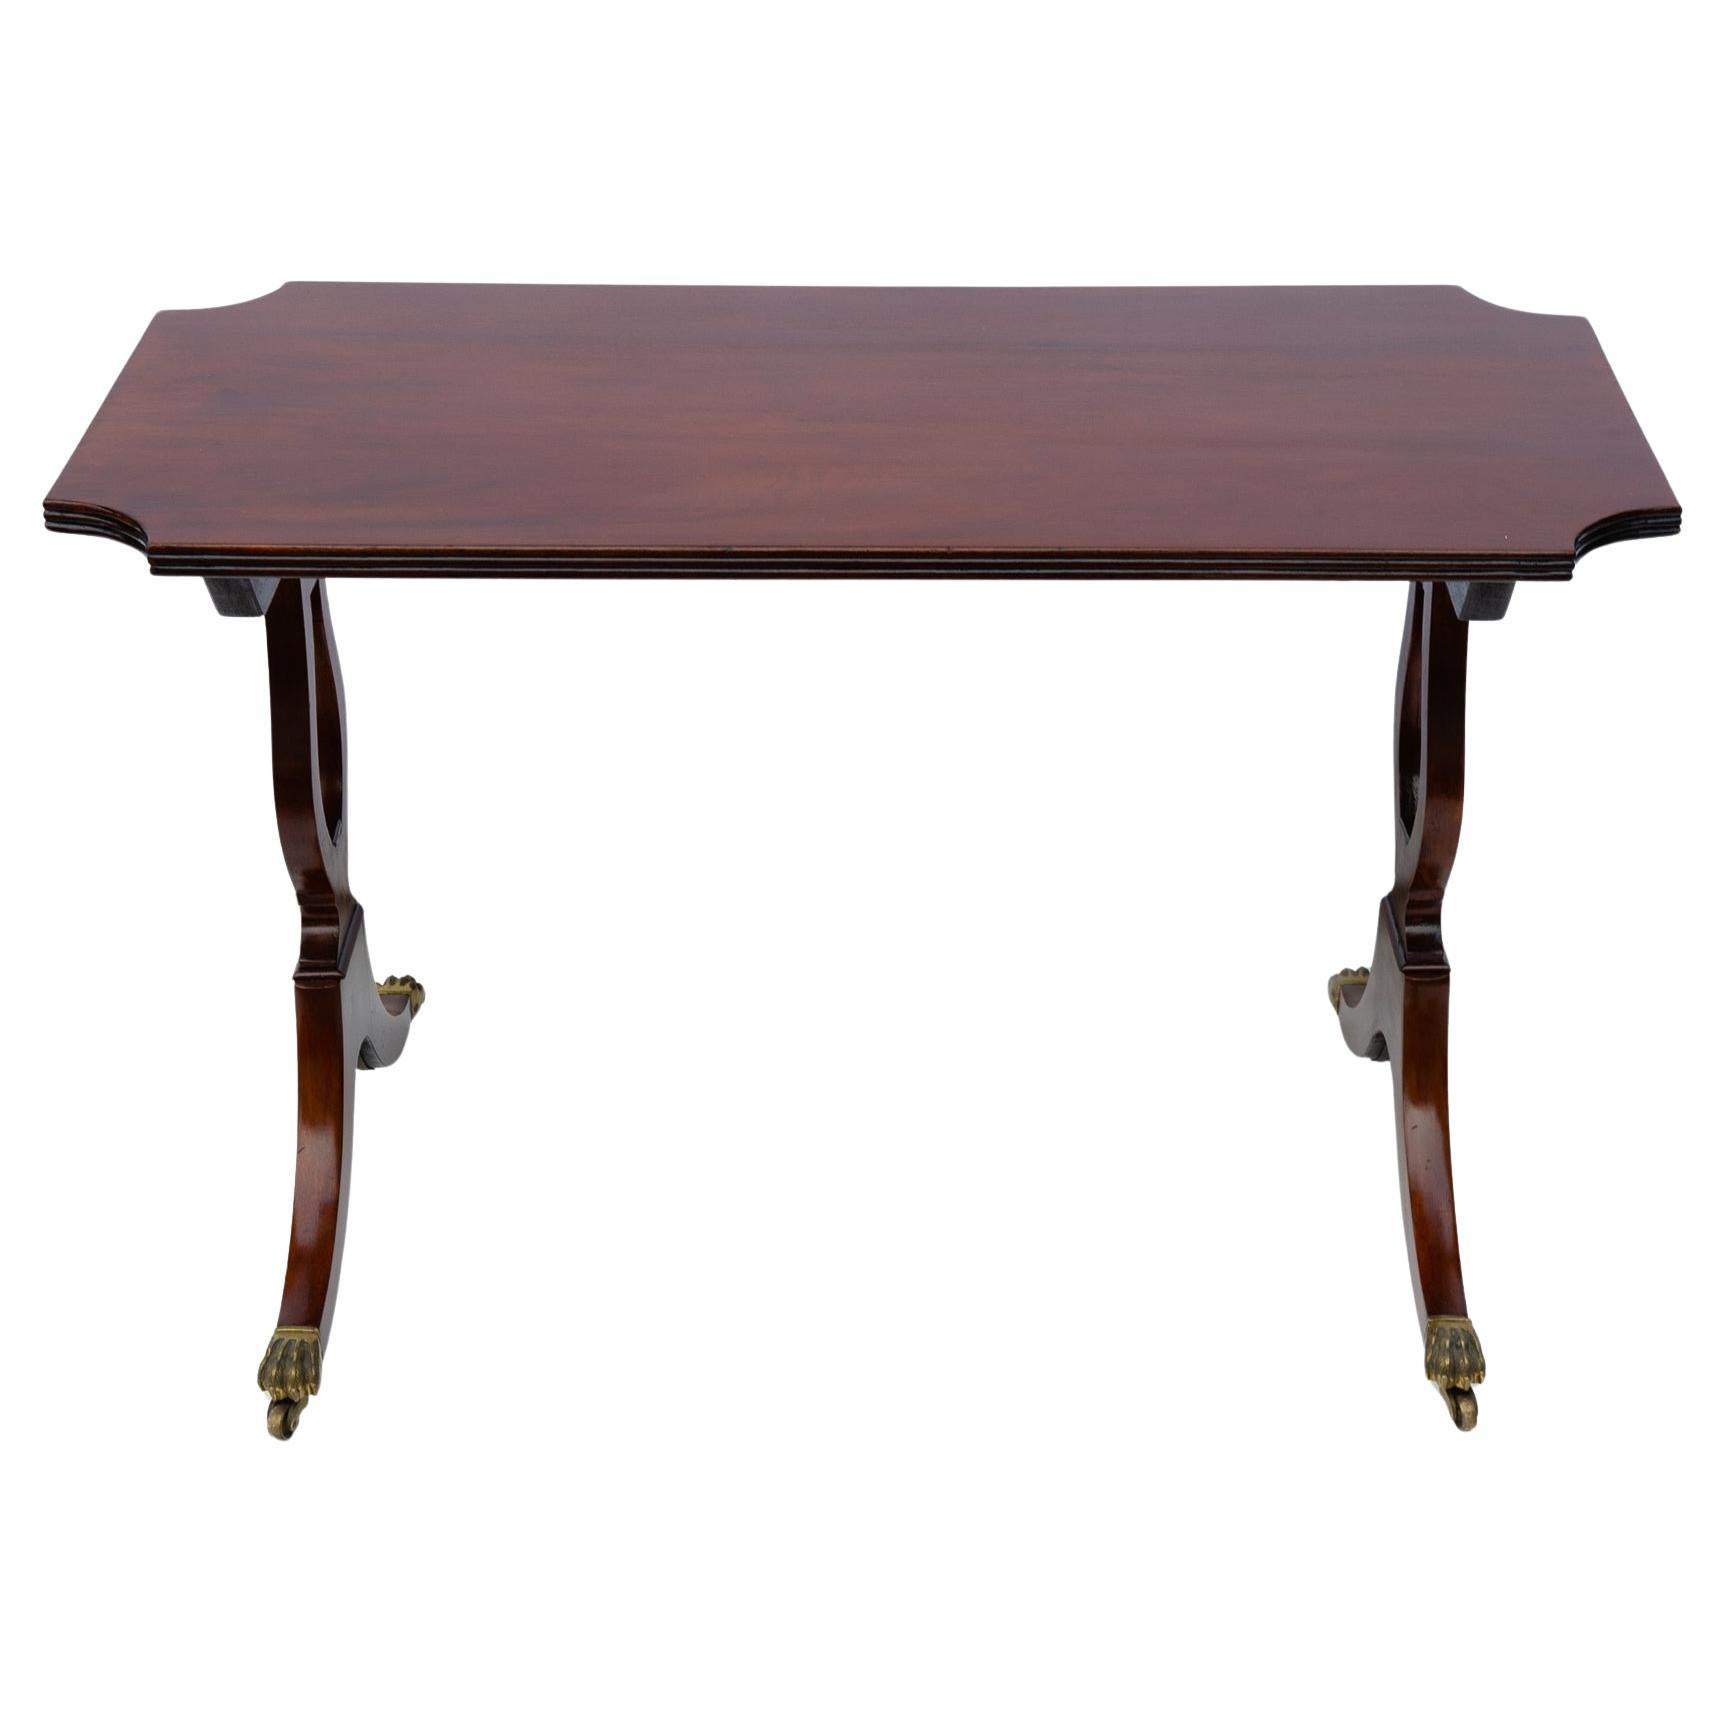 M/1107 -  Elegant antique English coffee table with lyre legs and little wheels. Useful everywhere: in the living room, study, bedroom. Also with a good price for closing activities.